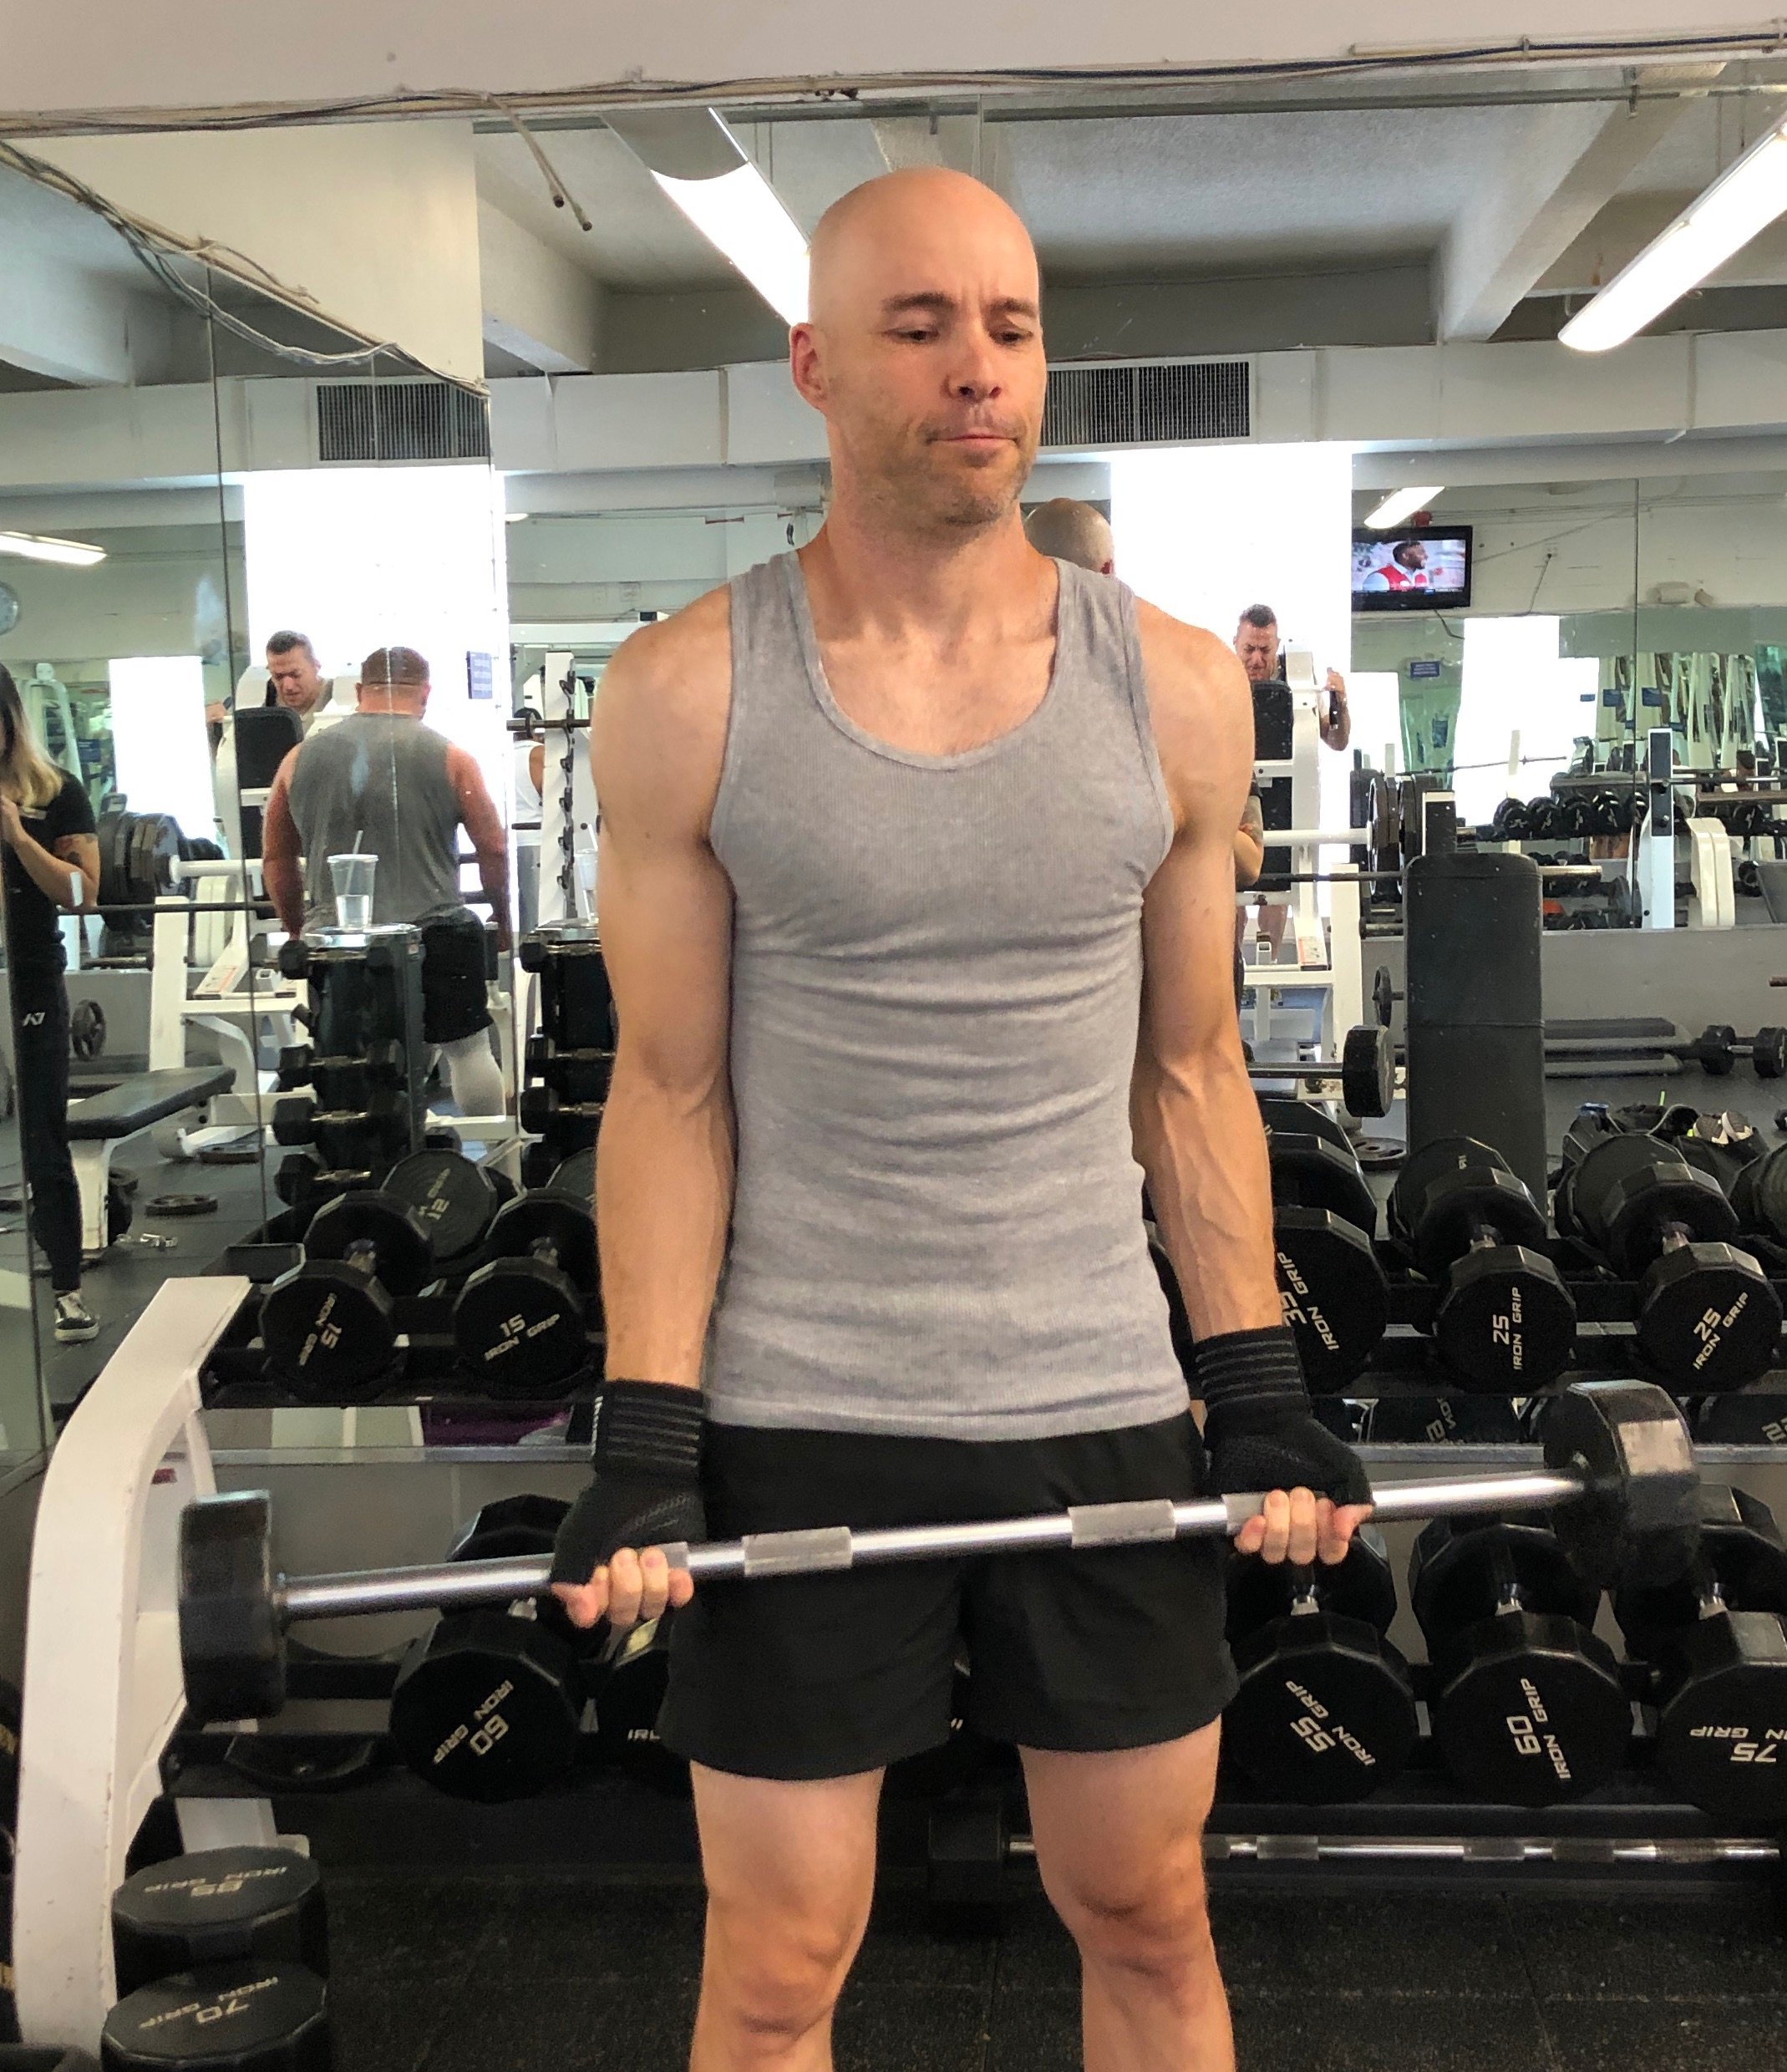 Ægte Fejlfri Forbrydelse Zack Hample on Twitter: "By popular demand, here's photographic evidence of  me wearing a tank top yesterday (for the very first time ever). Yes, I know  gym photos are douche-y, but this